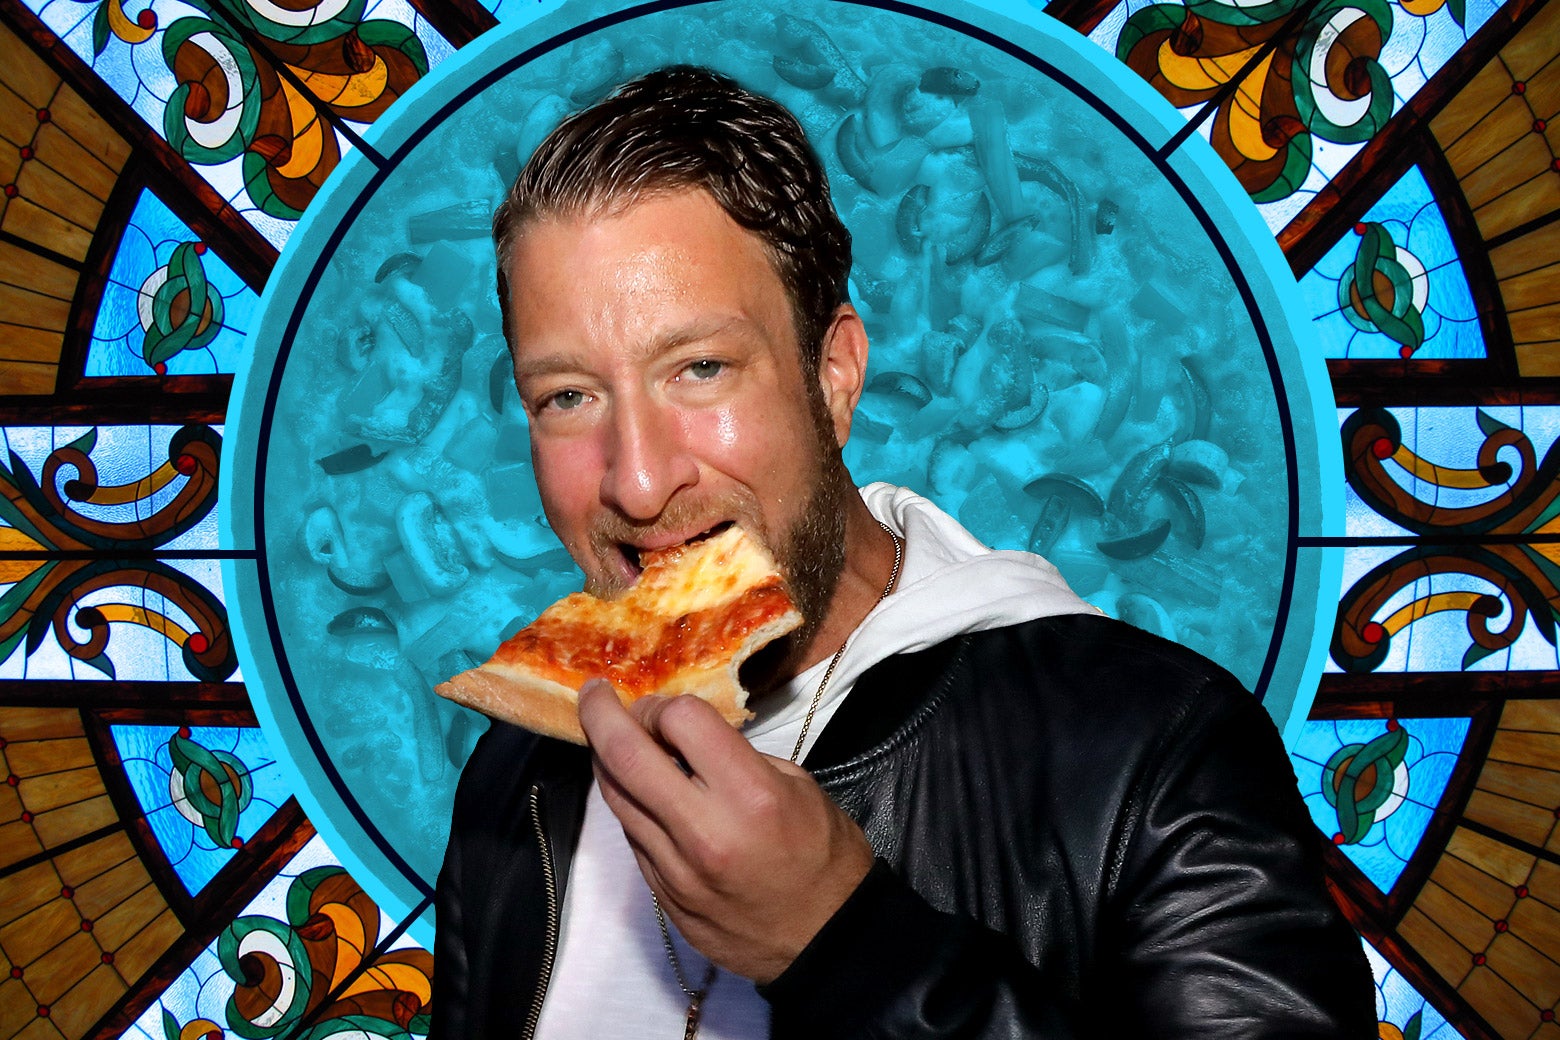 Dave Portnoy eats pizza with a colorful background.